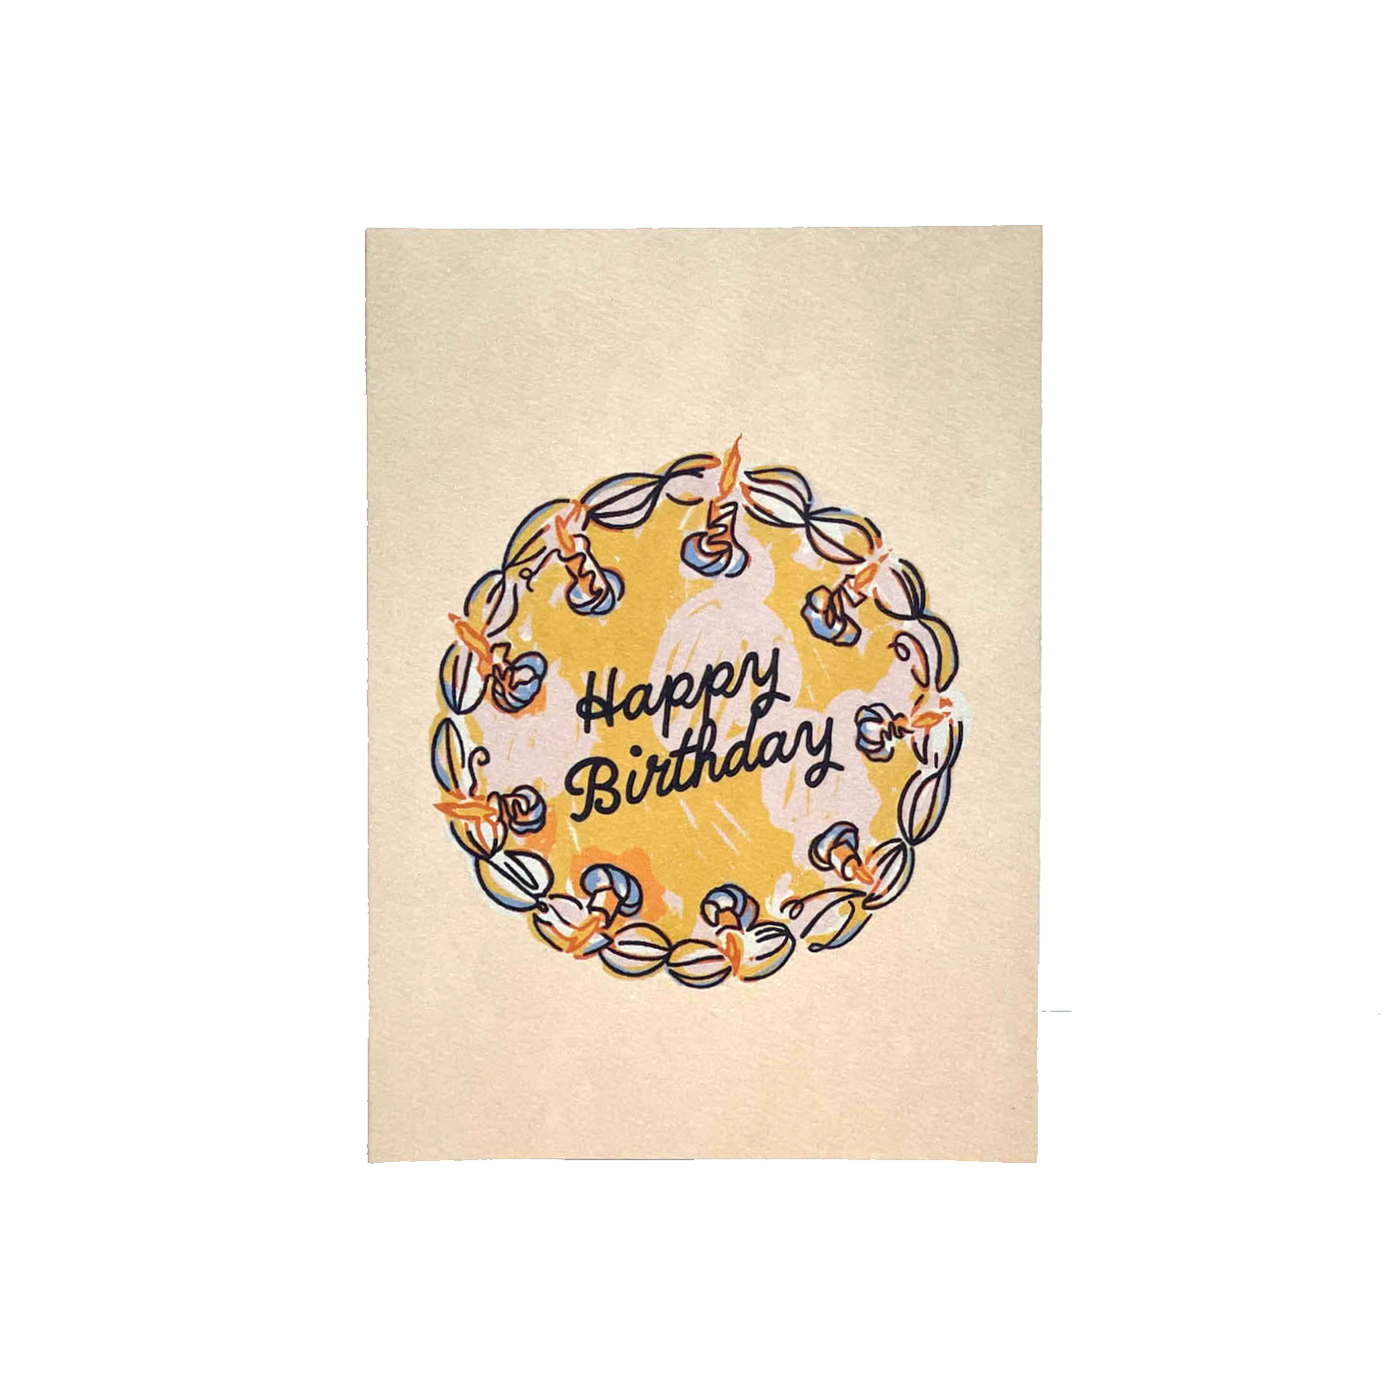 cream colored card that reads "happy birthday!" in black text on top of a cake illustration.